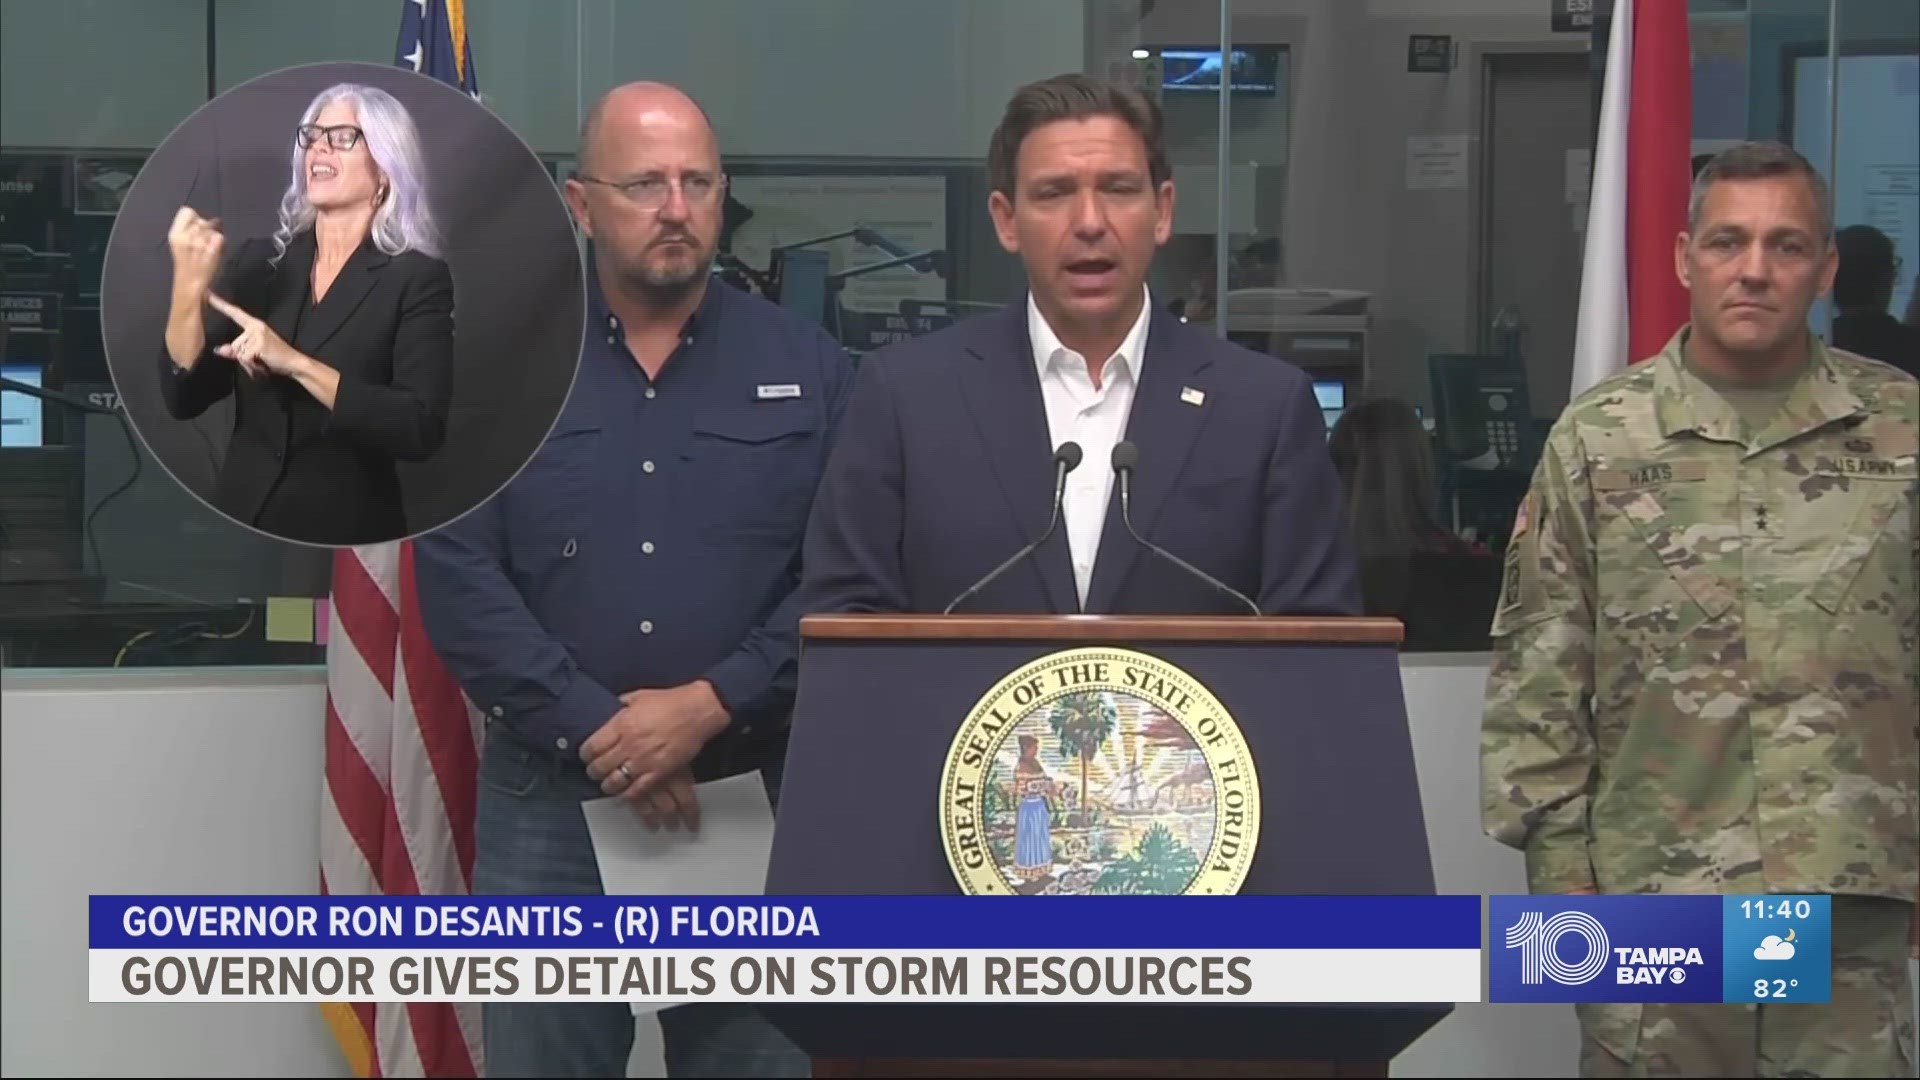 The governor issued an emergency for 33 counties in preparation for Tropical Storm Idalia.